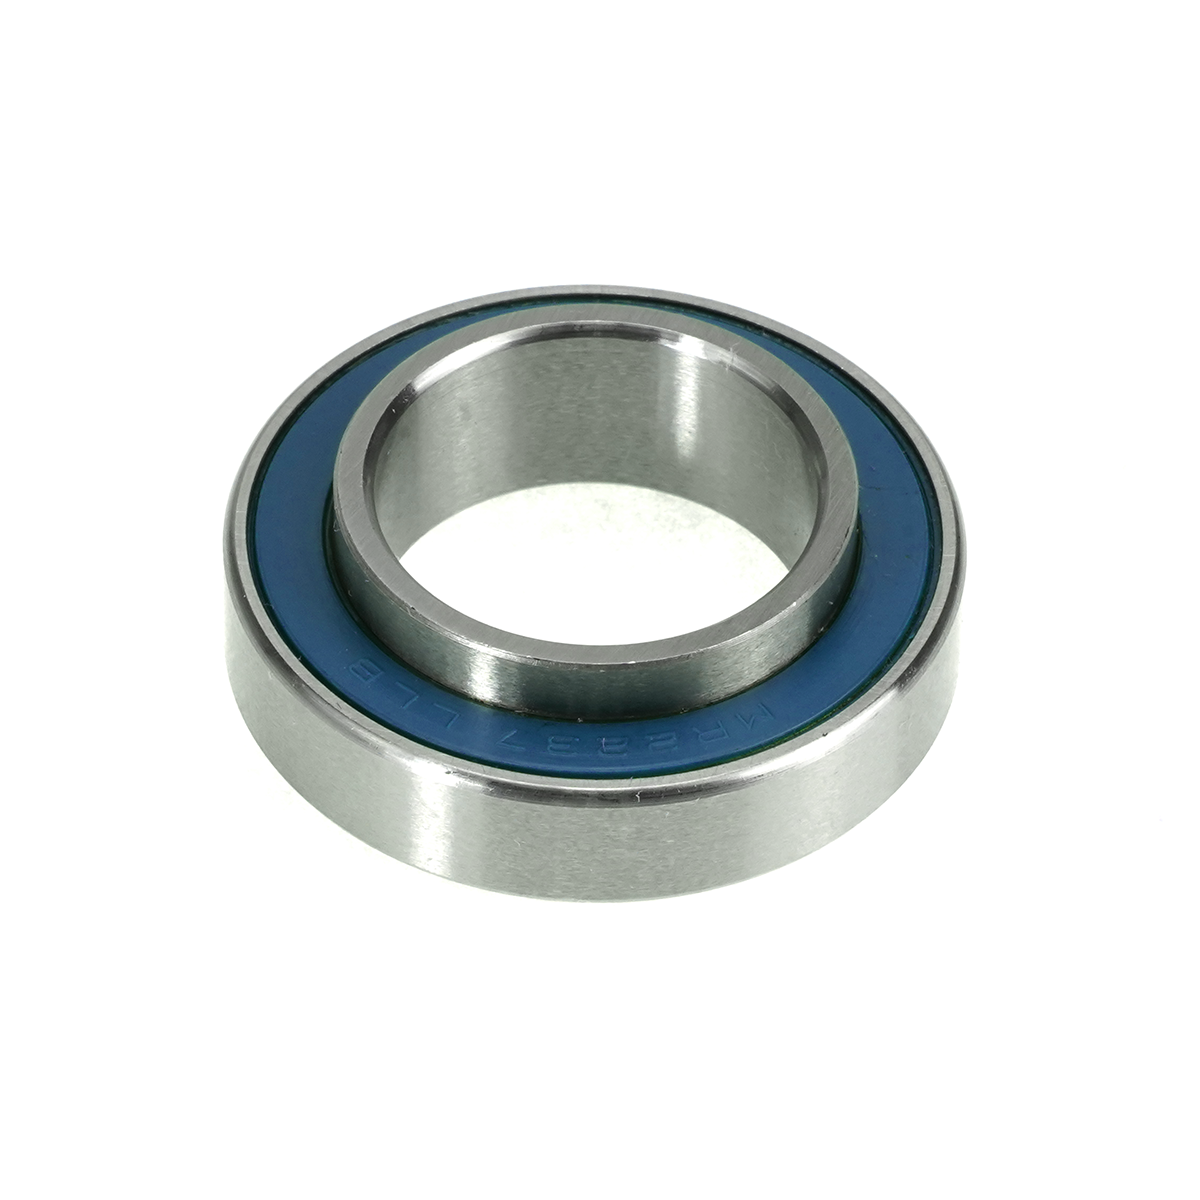 Enduro MR 22378 LLB-E - Extended Race ABEC-3 Radial Bearing (C3 Clearance) - 22mm x 37mm x 8/11.5mm